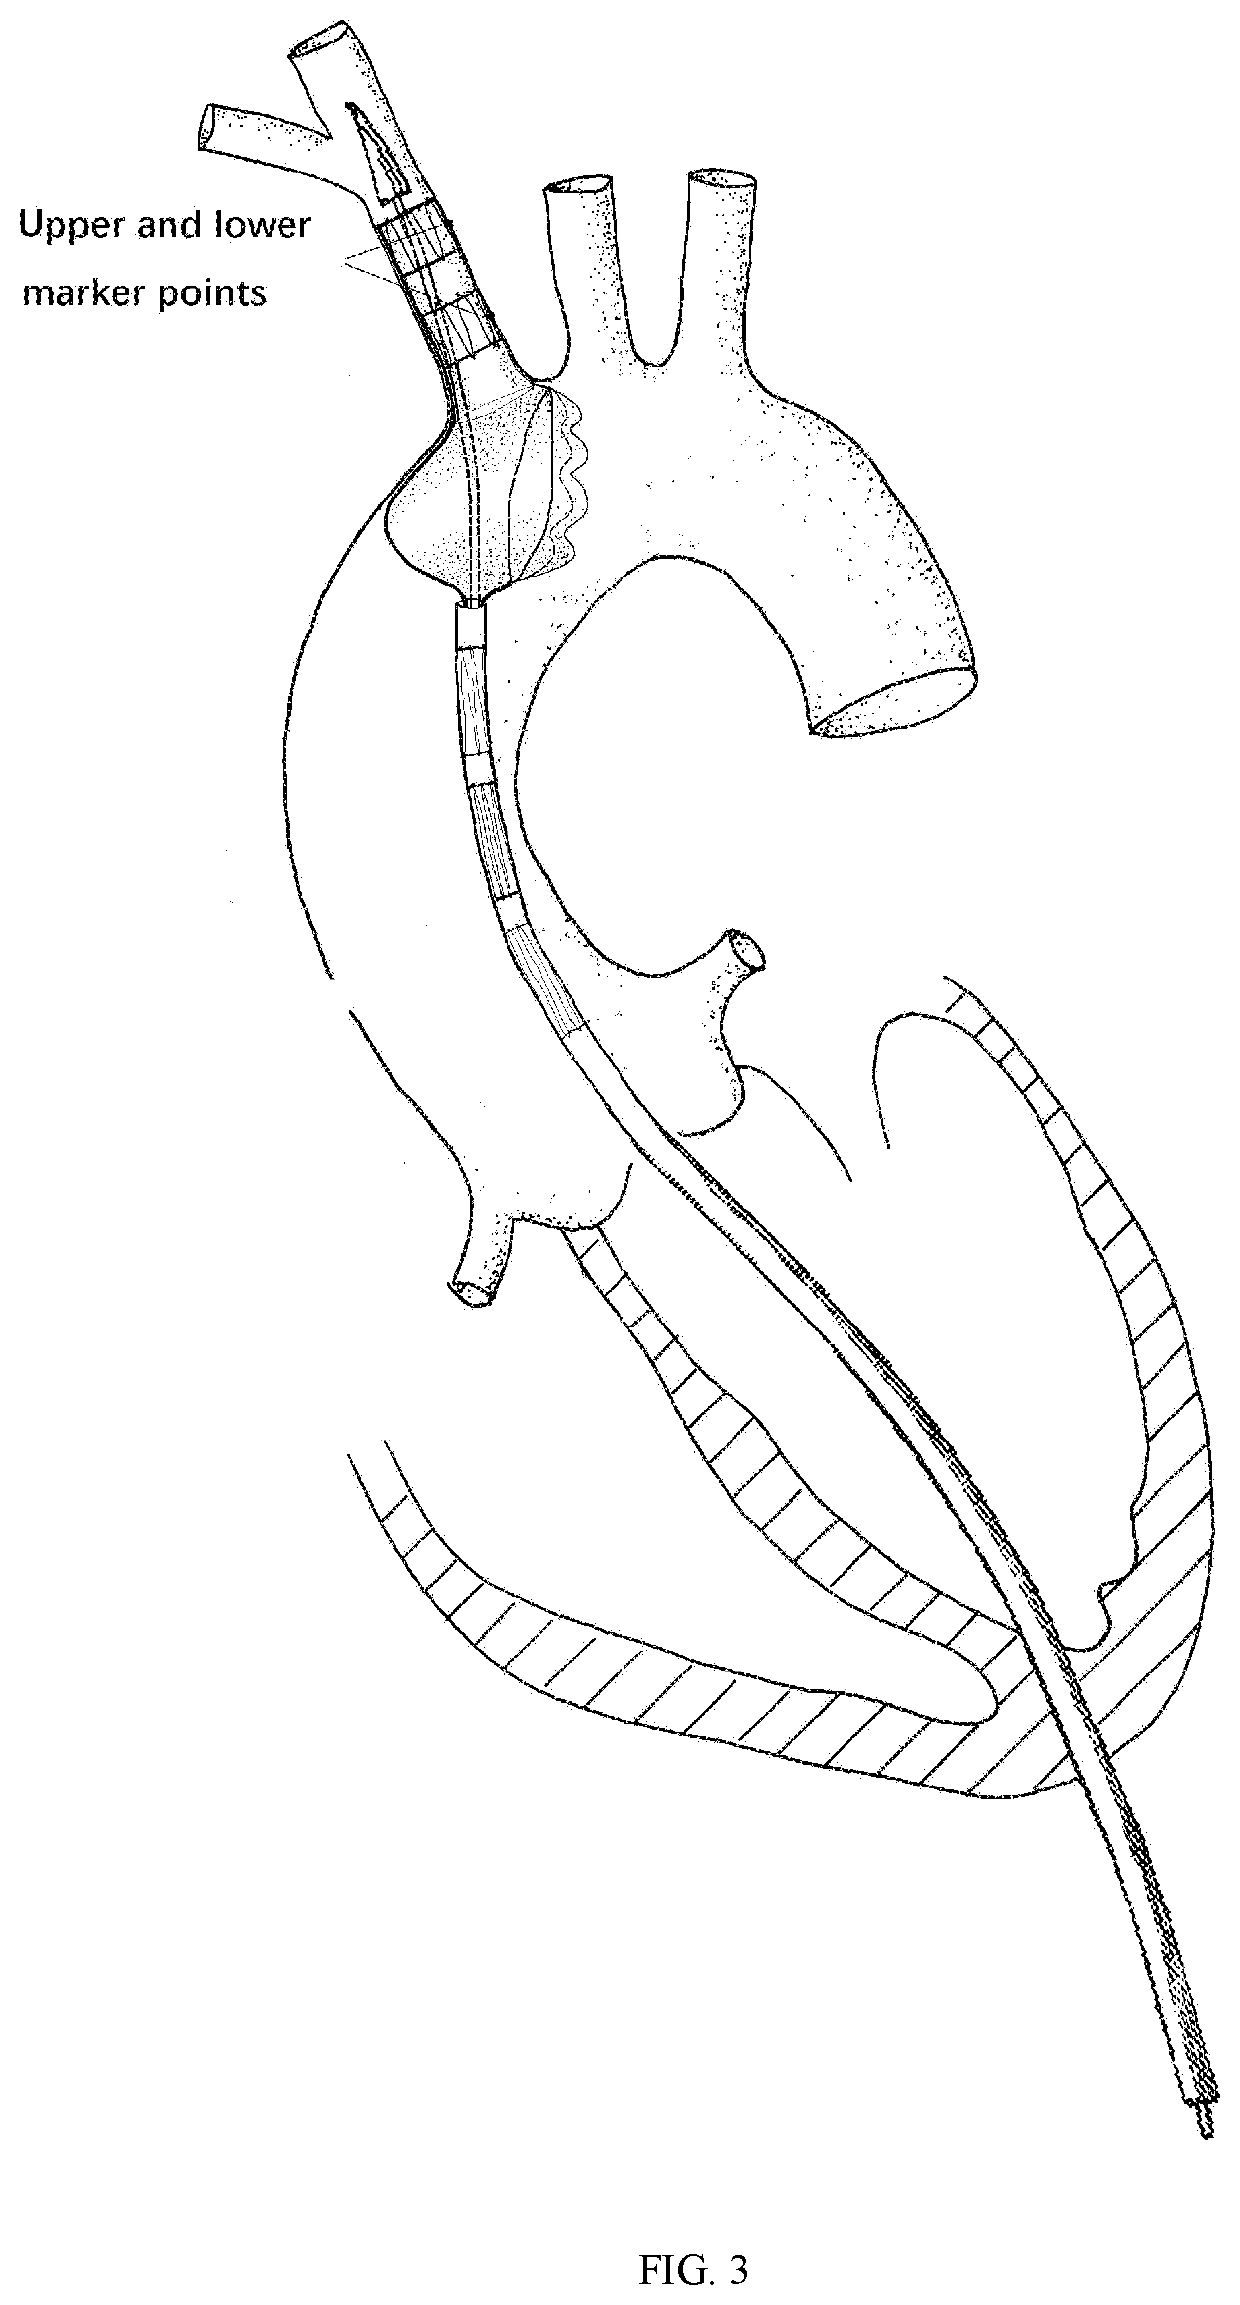 A transapical anatomical stent to repair ascending aorta and hemi arch